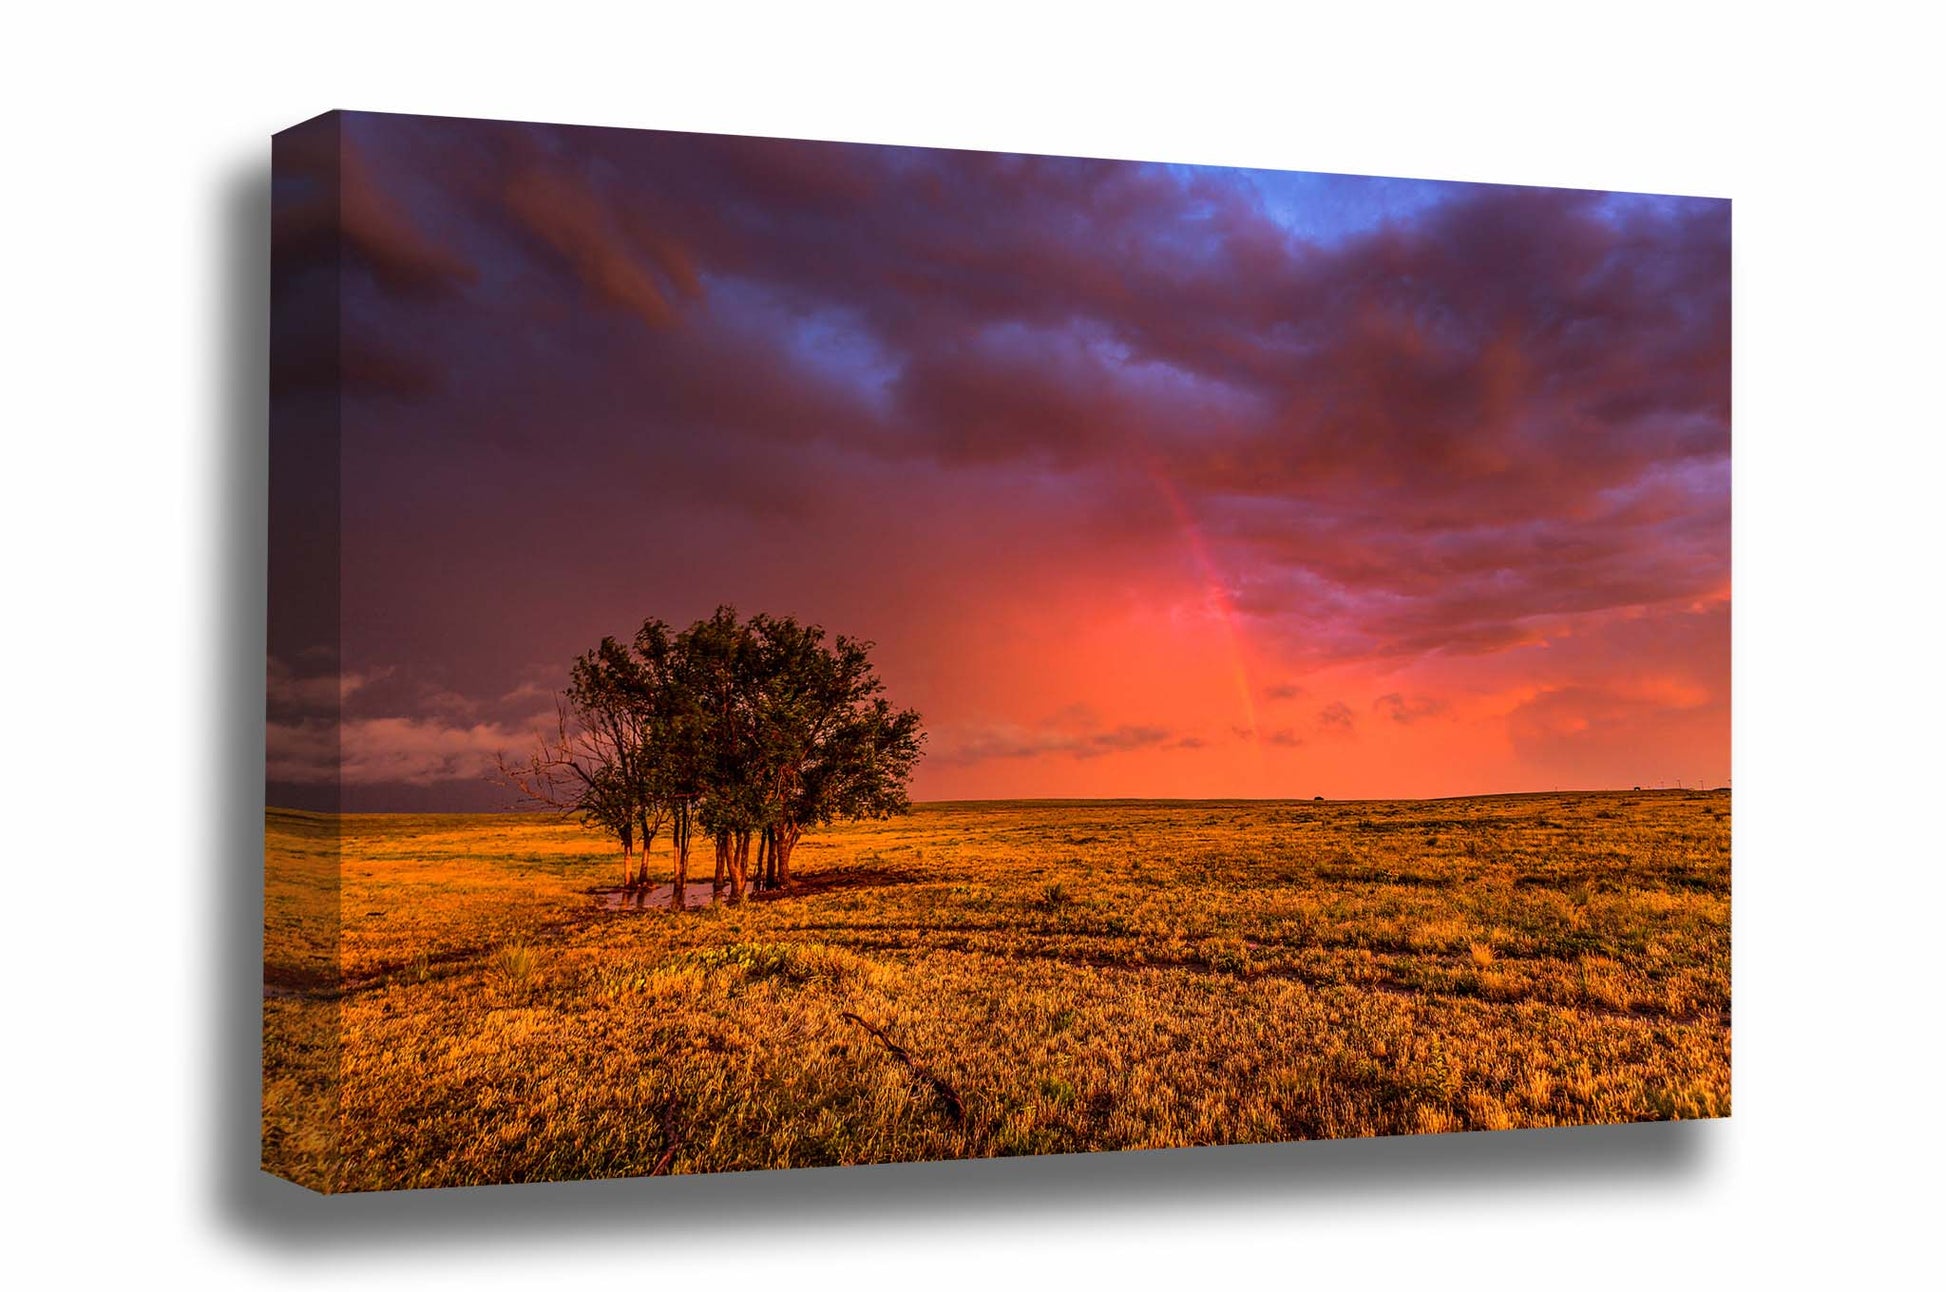 Great Plains canvas wall art of a rainbow in a stormy sky over a grove of trees on the open prairie at sunset on a spring evening in the Oklahoma Panhandle by Sean Ramsey of Southern Plains Photography.